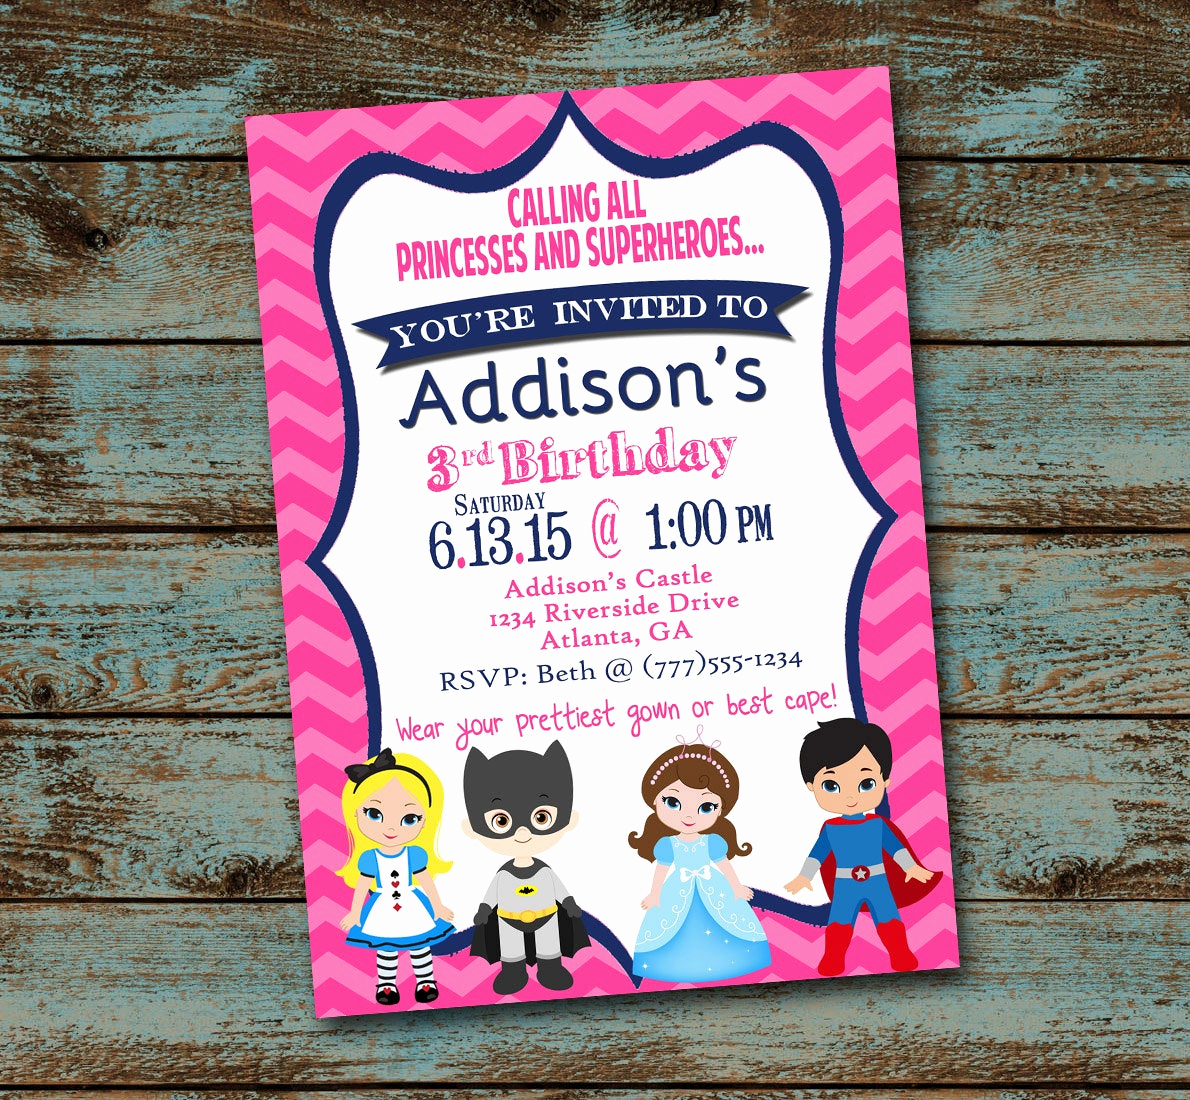 Calling All Superheroes Invitation Best Of Princess and Superhero Birthday Party Invitation Calling All